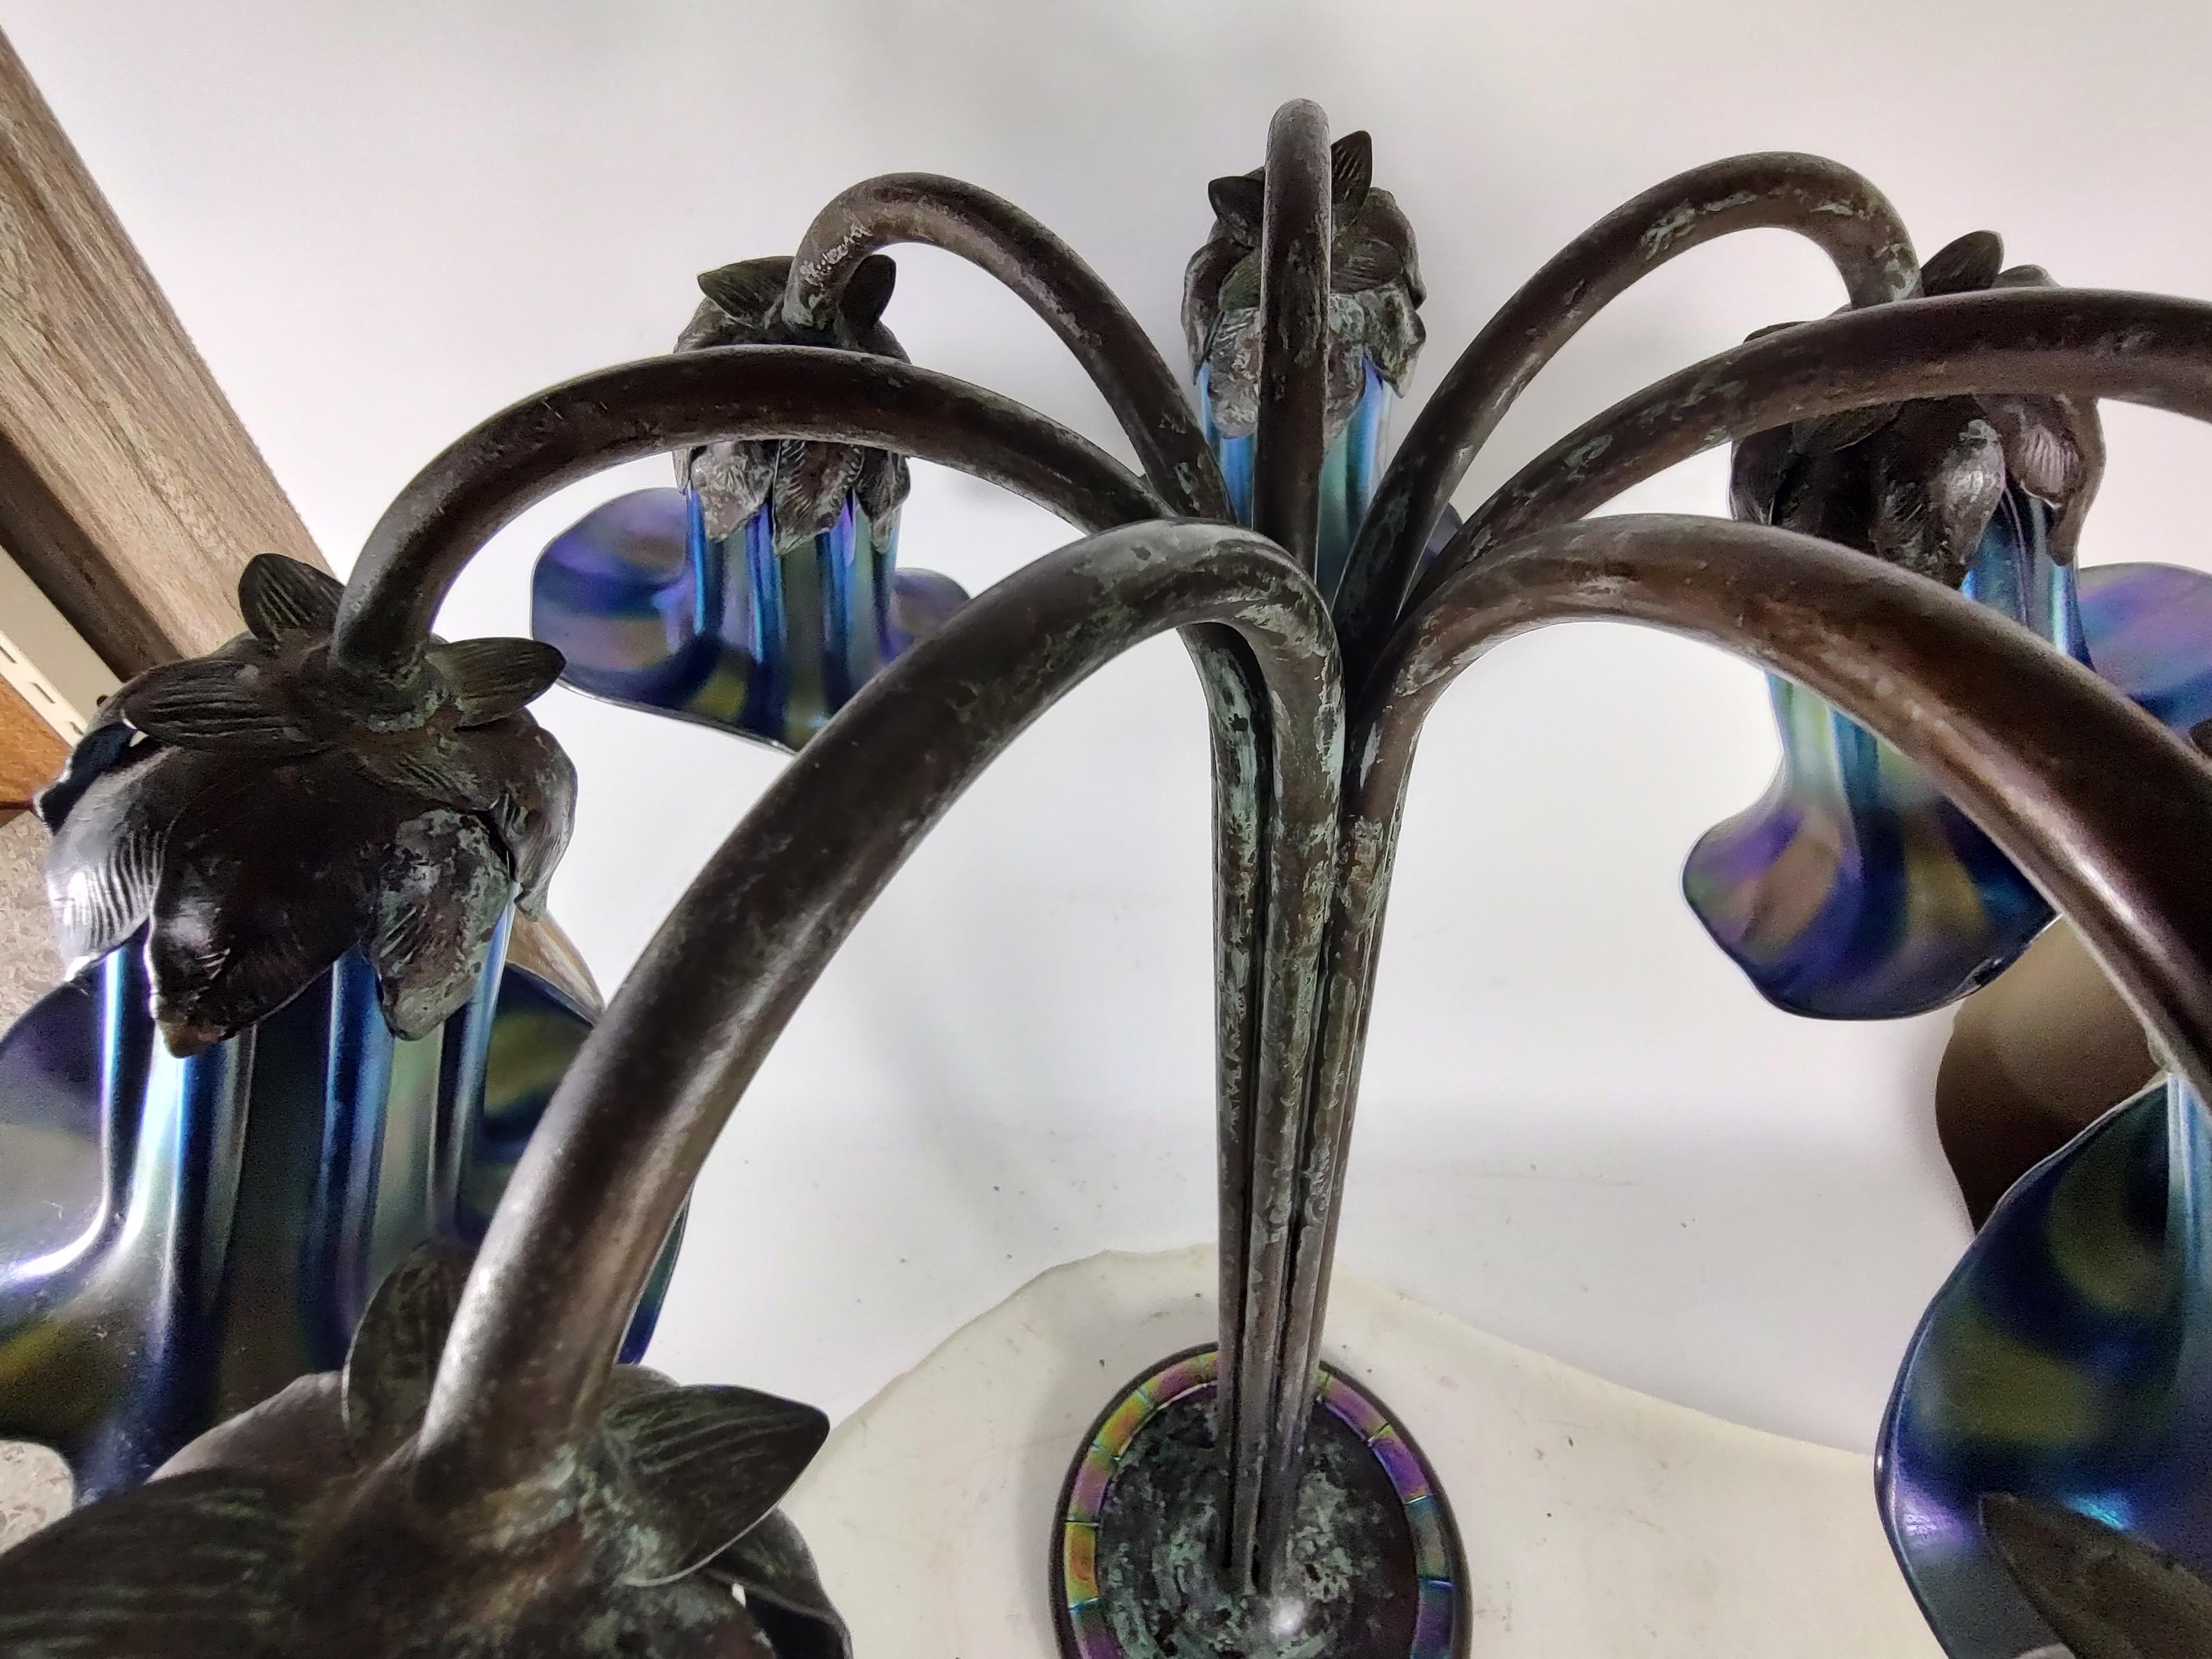 Mid-20th Century Tiffany Style Seven Light Lily Lamp  Favrille Glass Base Signed Tiffany Studios For Sale